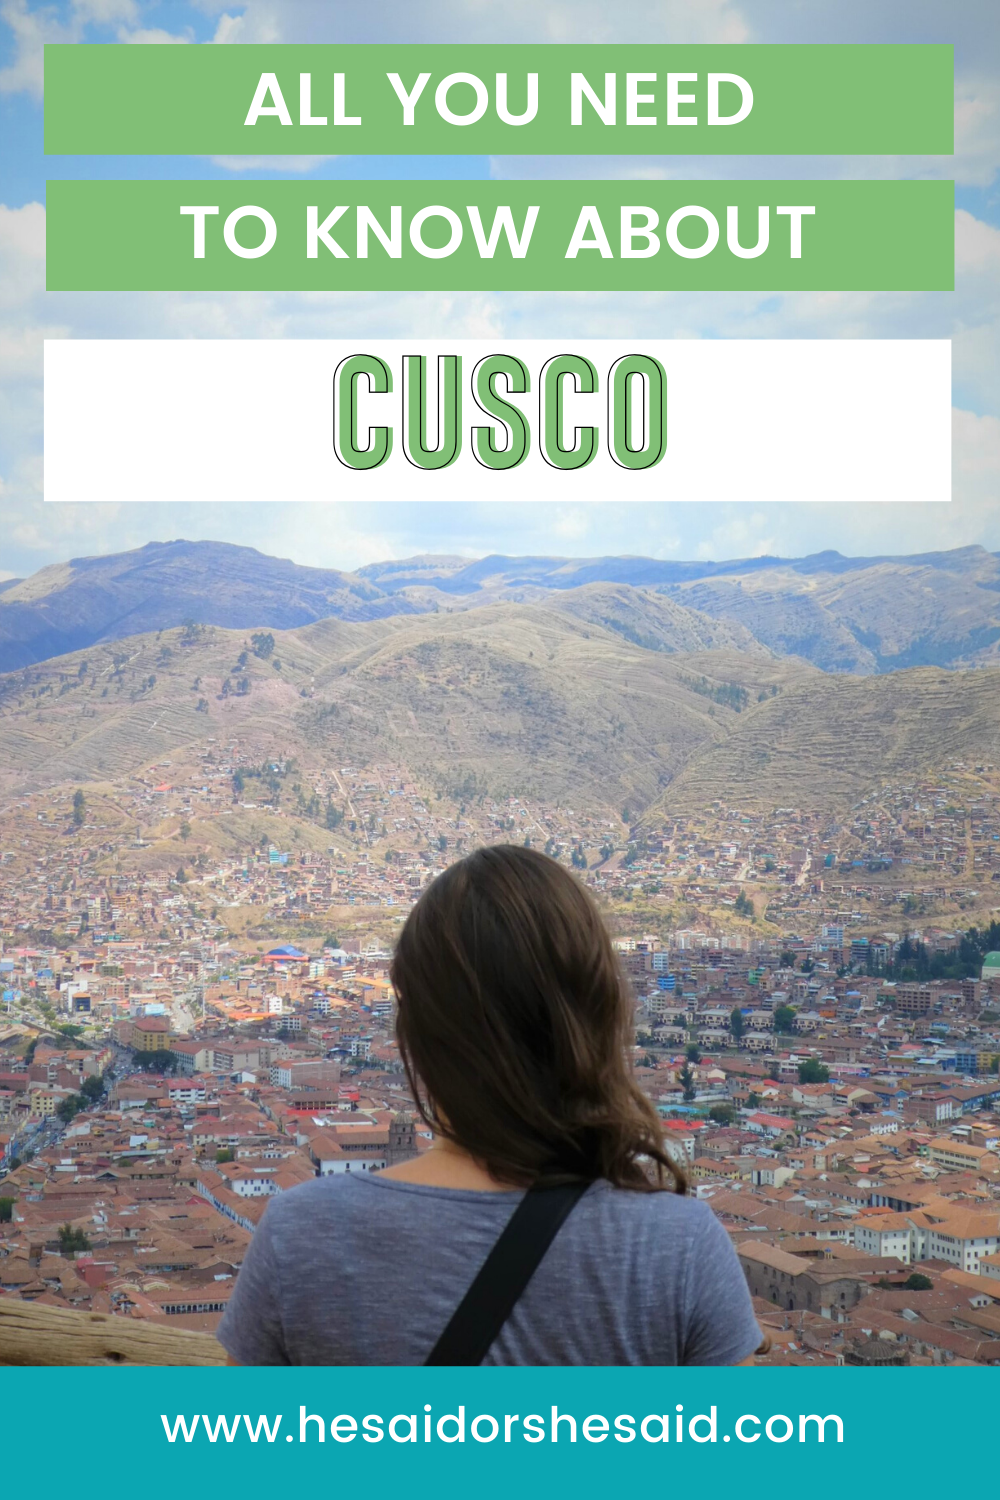 All you need to know about Cusco by hesaidorshesaid